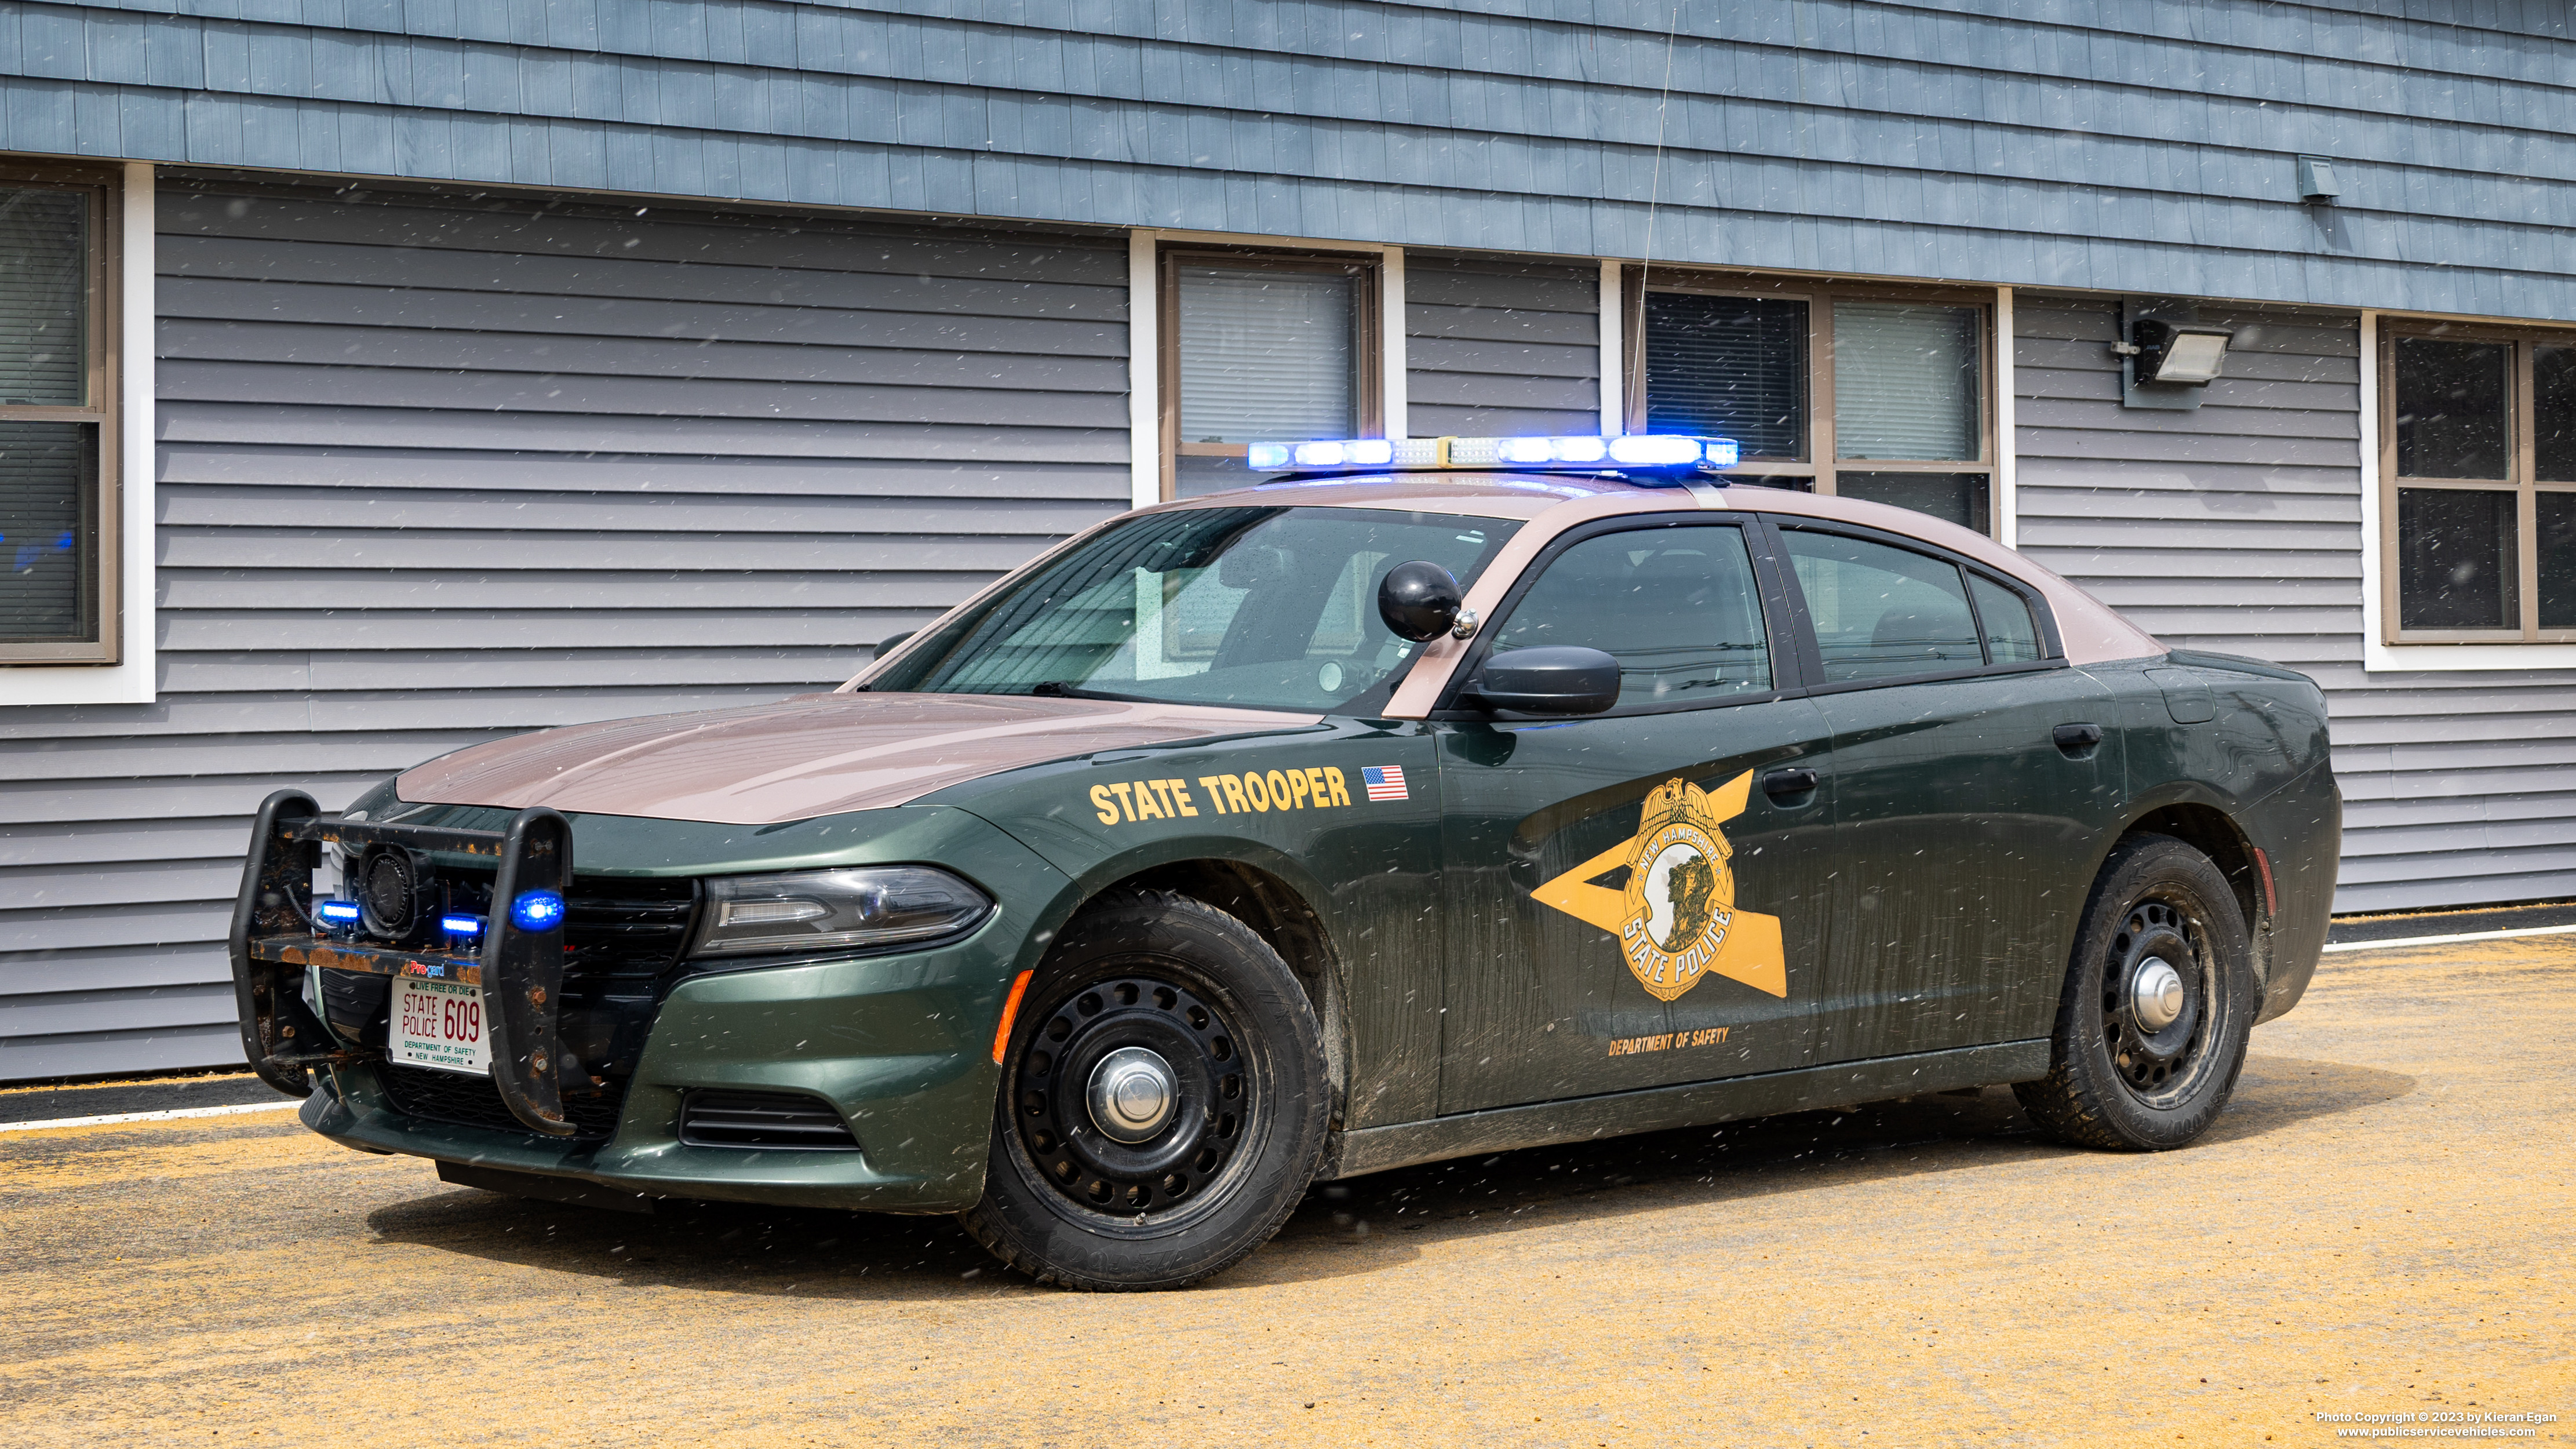 A photo  of New Hampshire State Police
            Cruiser 609, a 2015-2016 Dodge Charger             taken by Kieran Egan